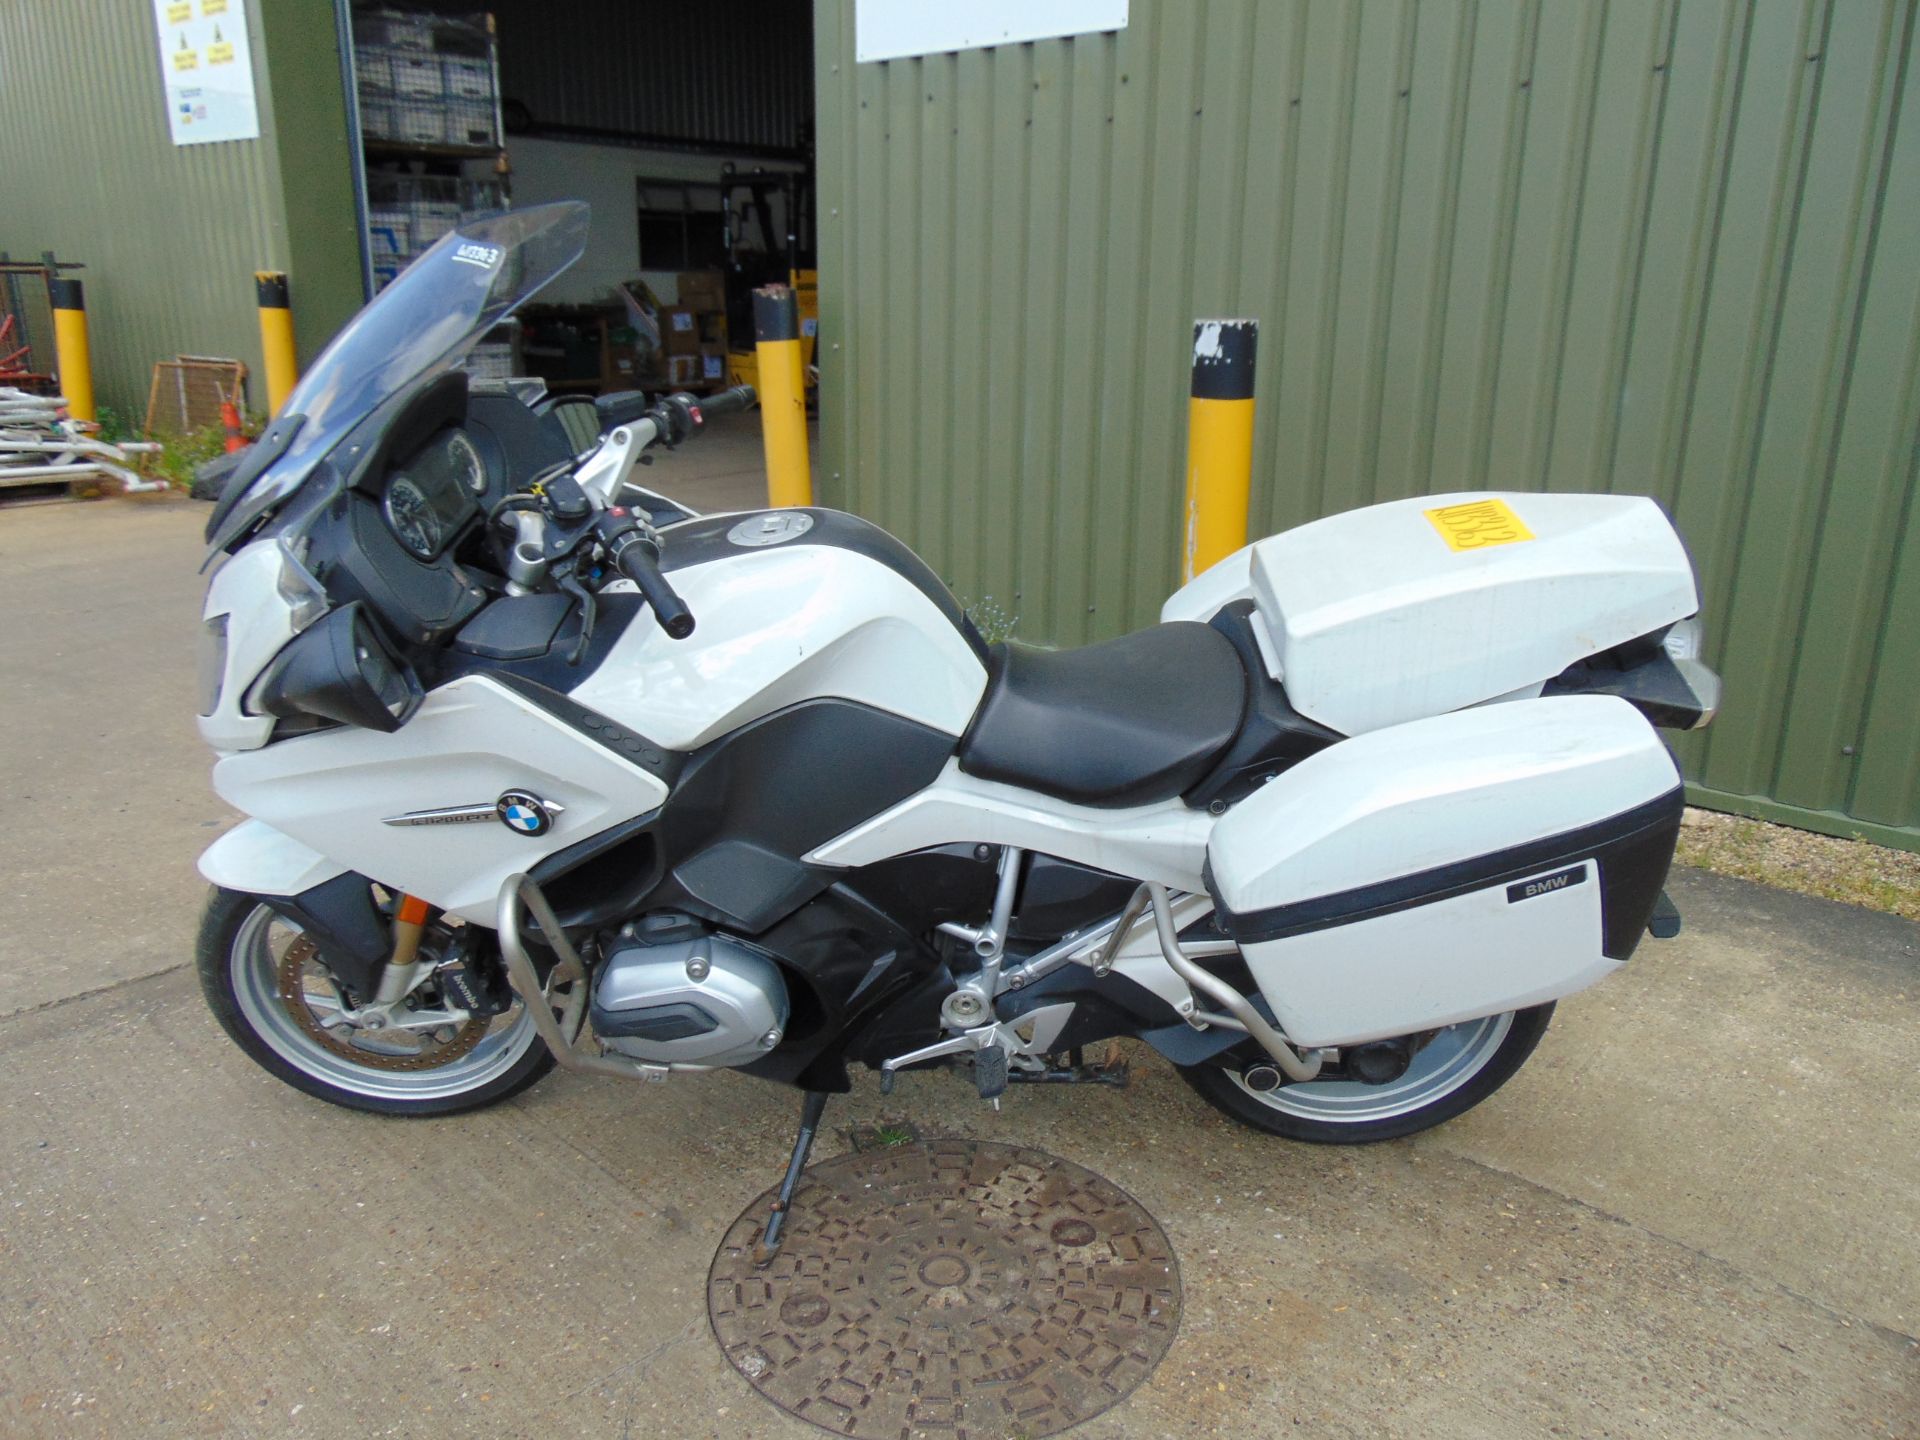 UK Police a 1 Owner 2019 BMW R1200RT Motorbike - Image 6 of 20